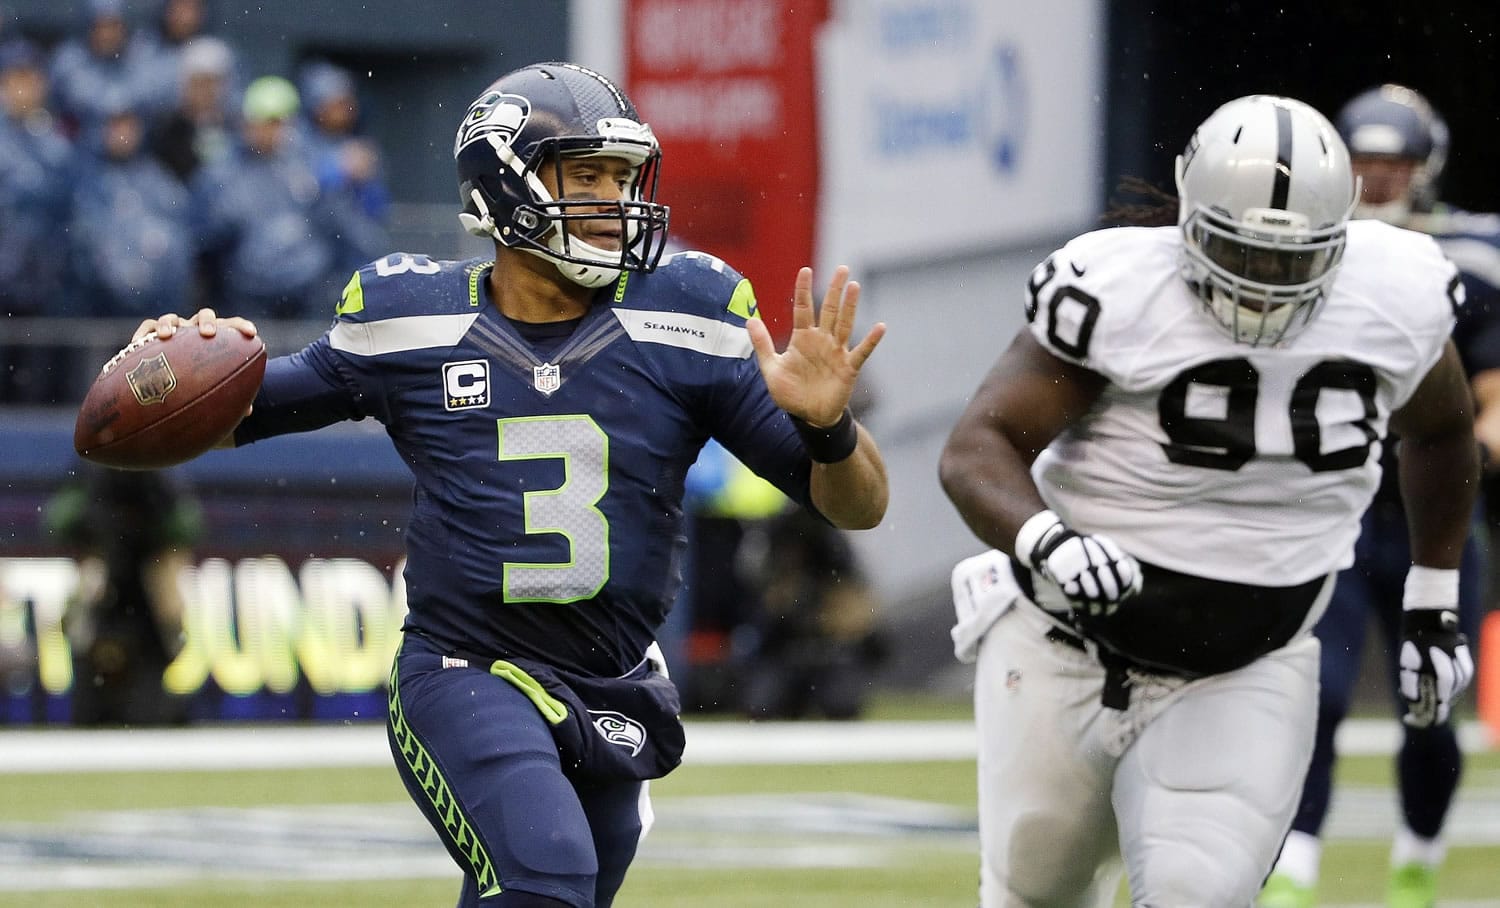 Seattle Seahawks quarterback Russell Wilson (3), is chased by Oakland Raiders' Pat Sims, acknowledged he did not play well at all in Sunday's game.